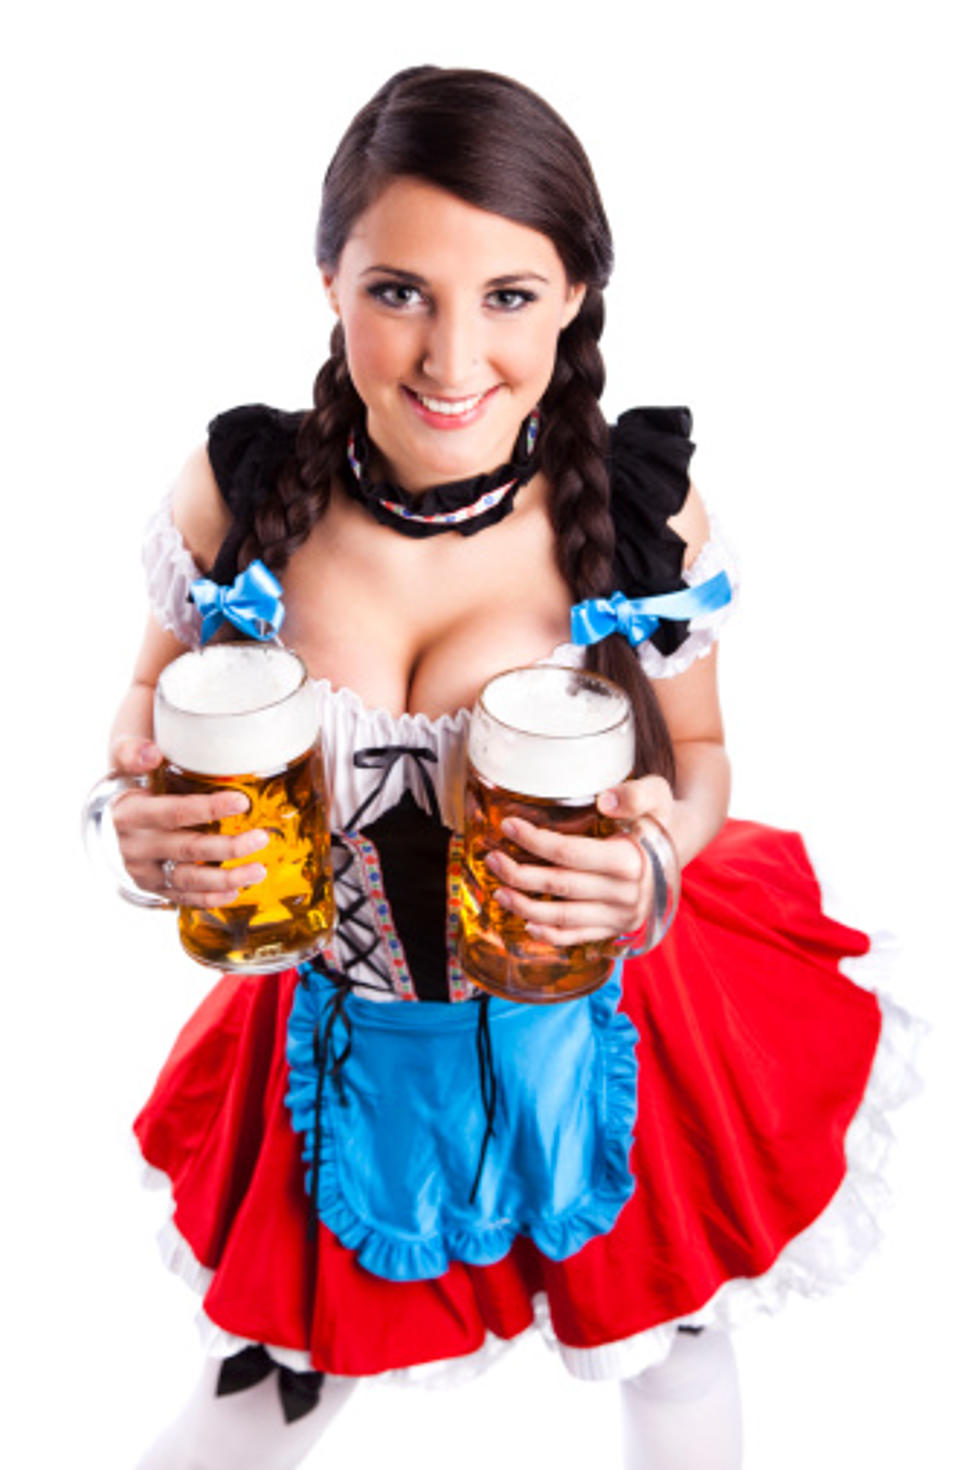 Find Out Where To Celebrate Oktoberfest This Weekend In Midland